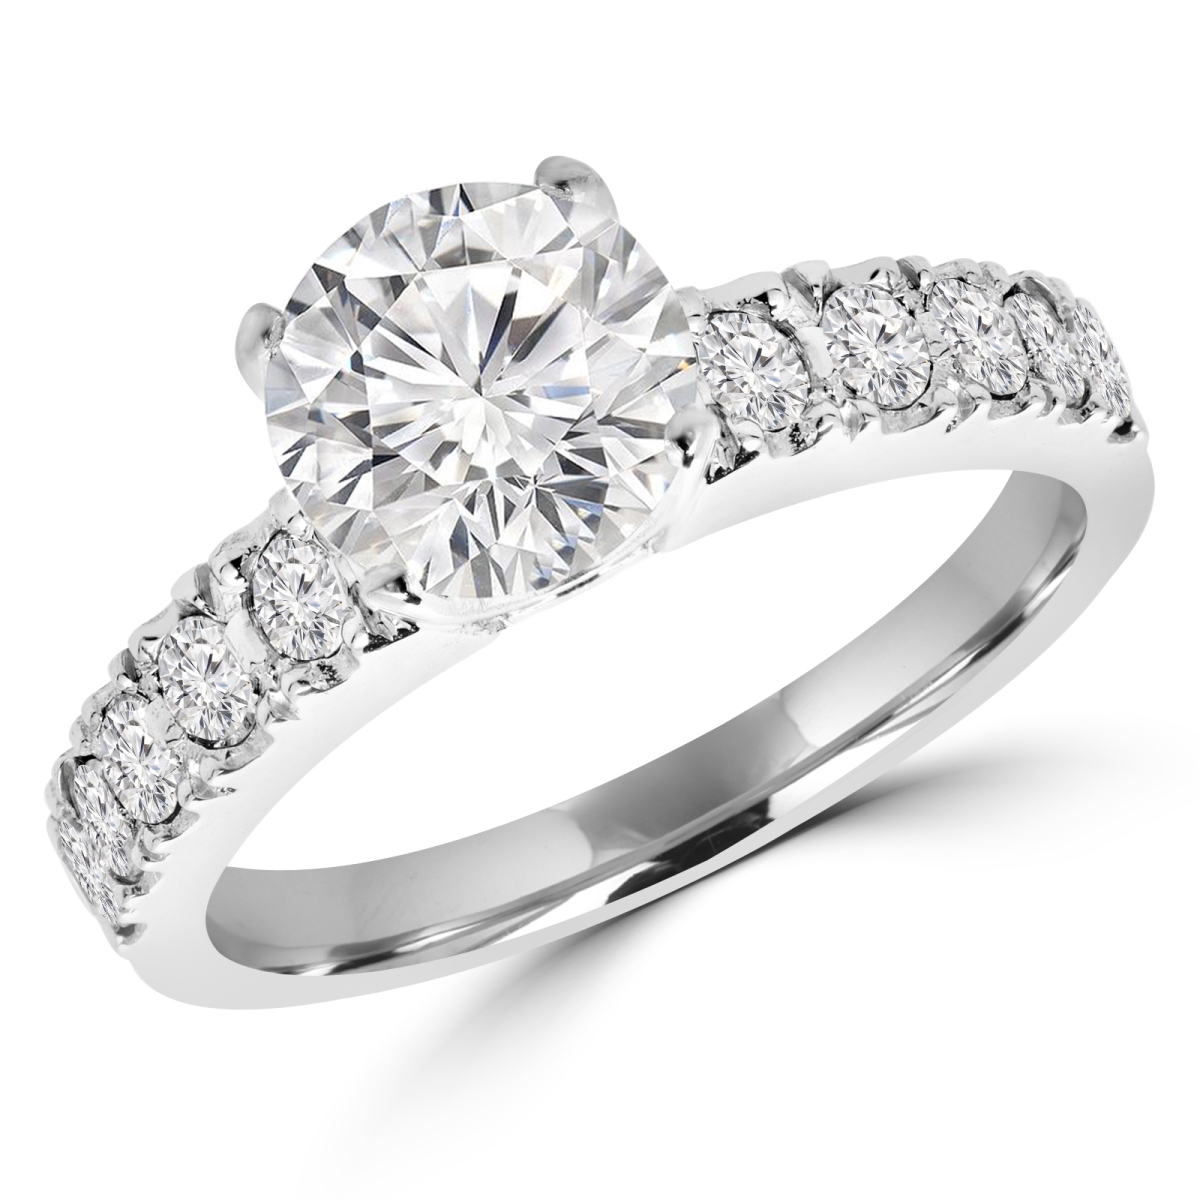 Picture of Majesty Diamonds MD180405-P 0.9 CTW Round Diamond Solitaire with Accents Engagement Ring in 14K White Gold